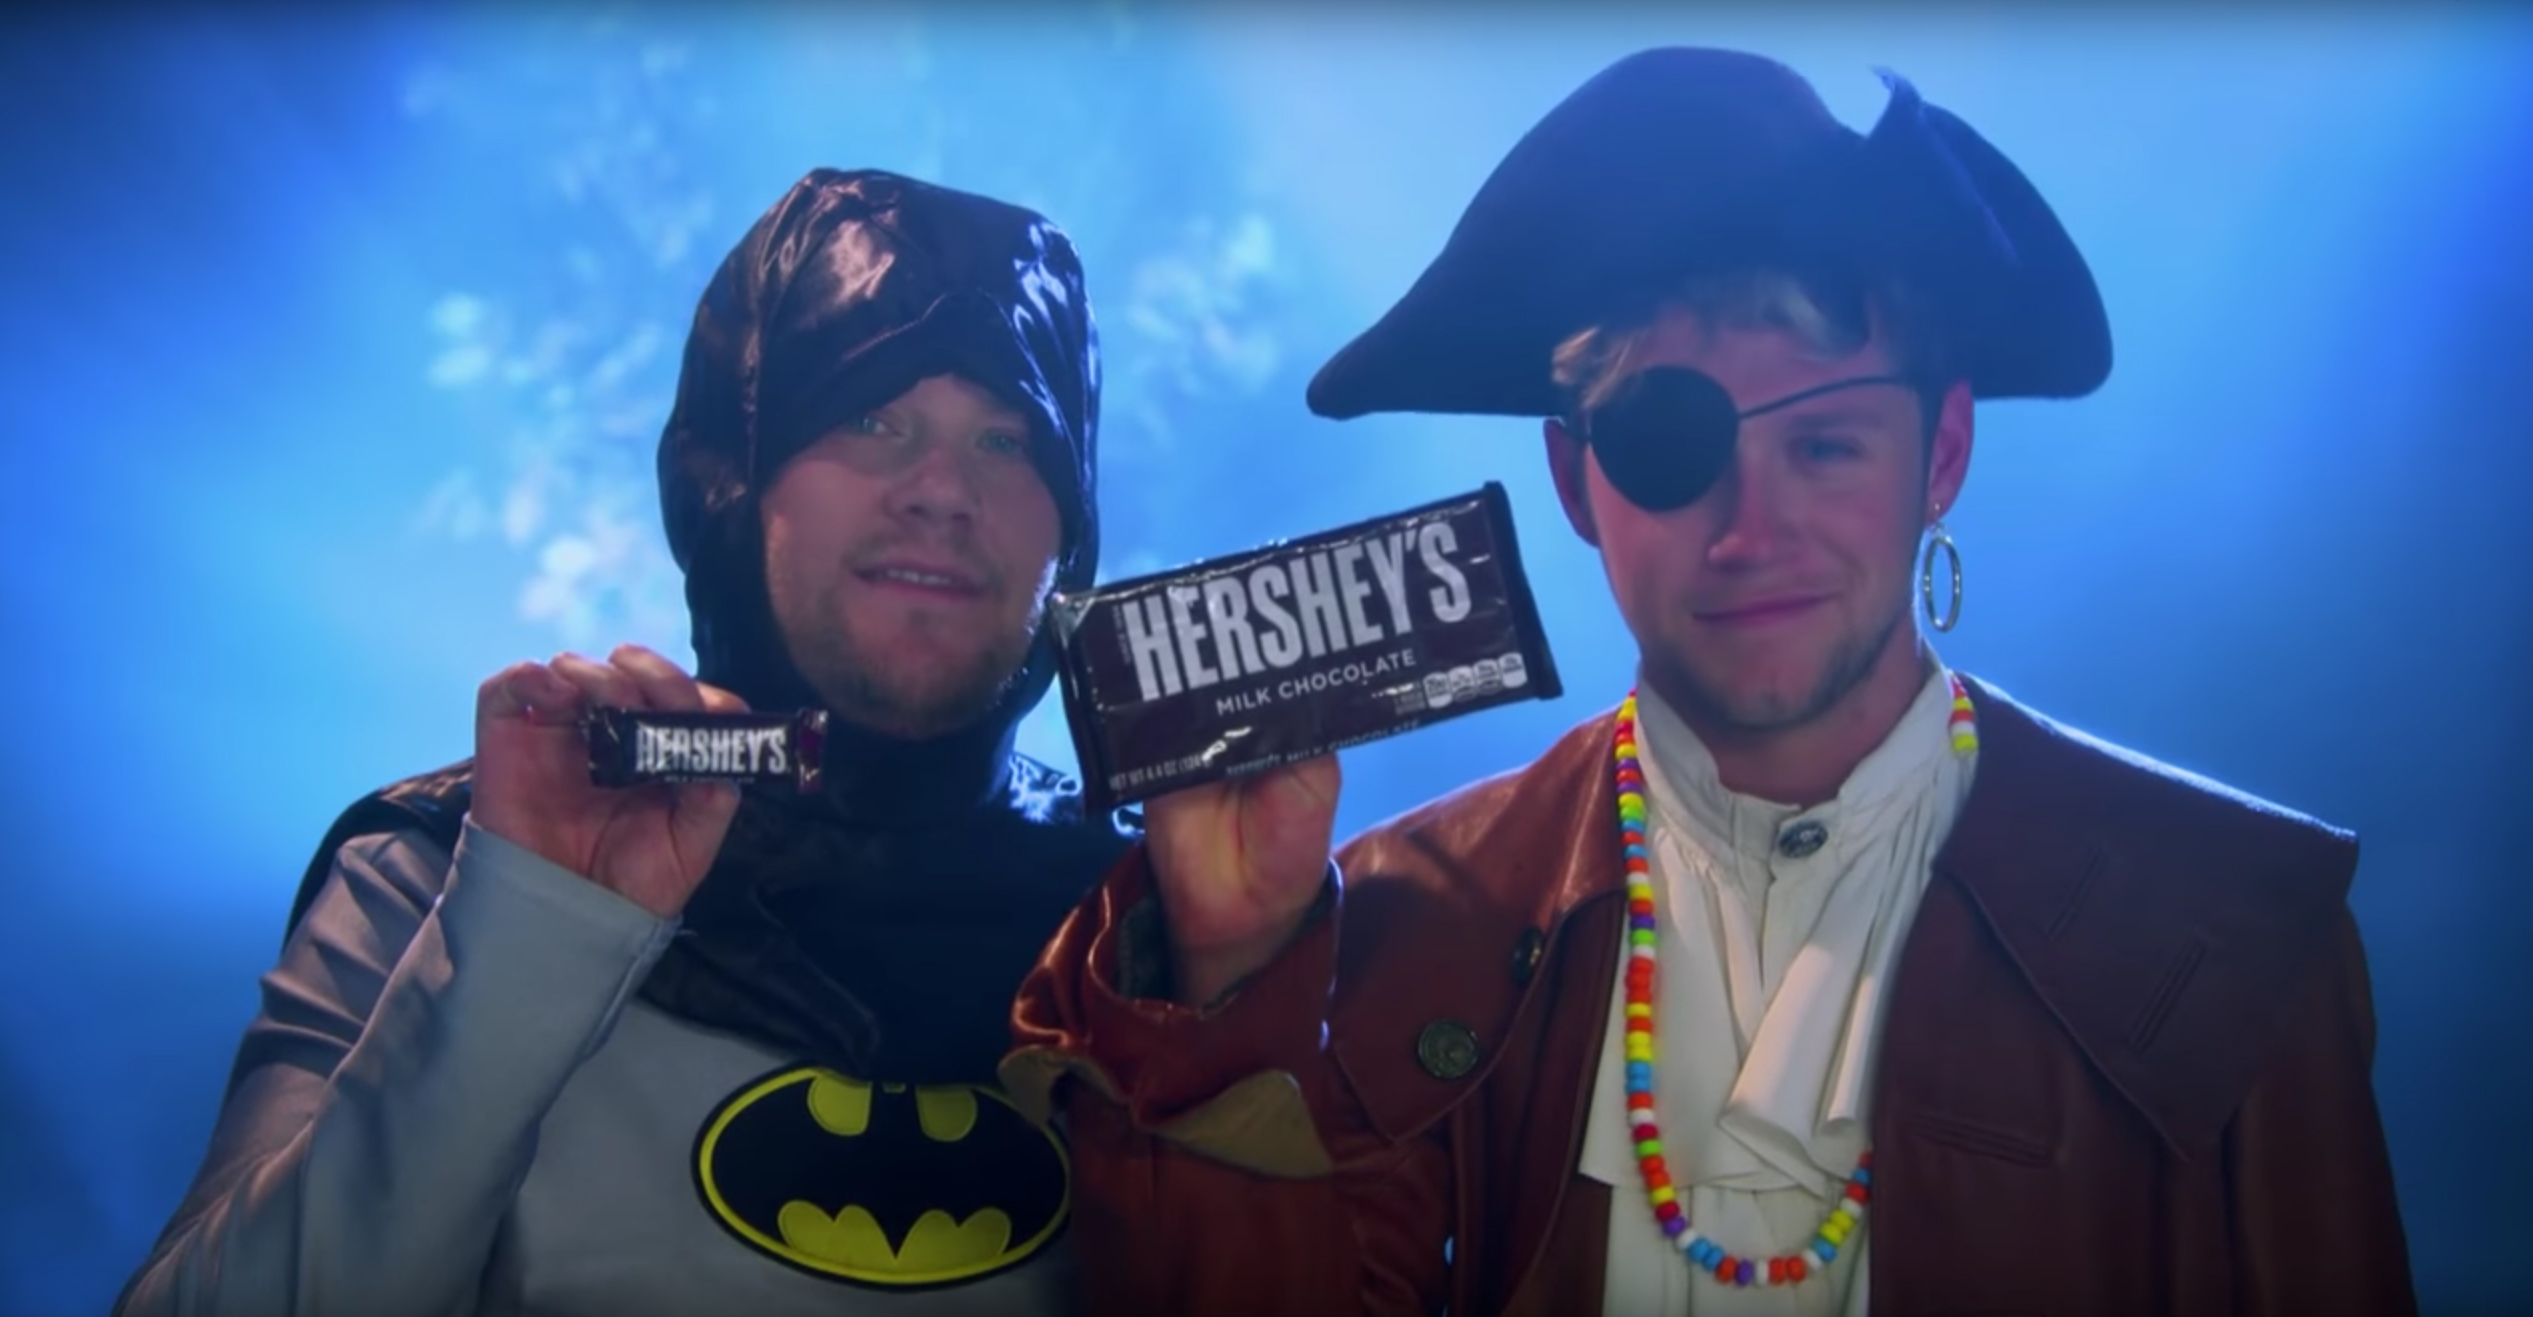 James Corden and One Direction's Niall Horan performed an amusing tribute to trick-or-treating during The Late Late Show Thursday night